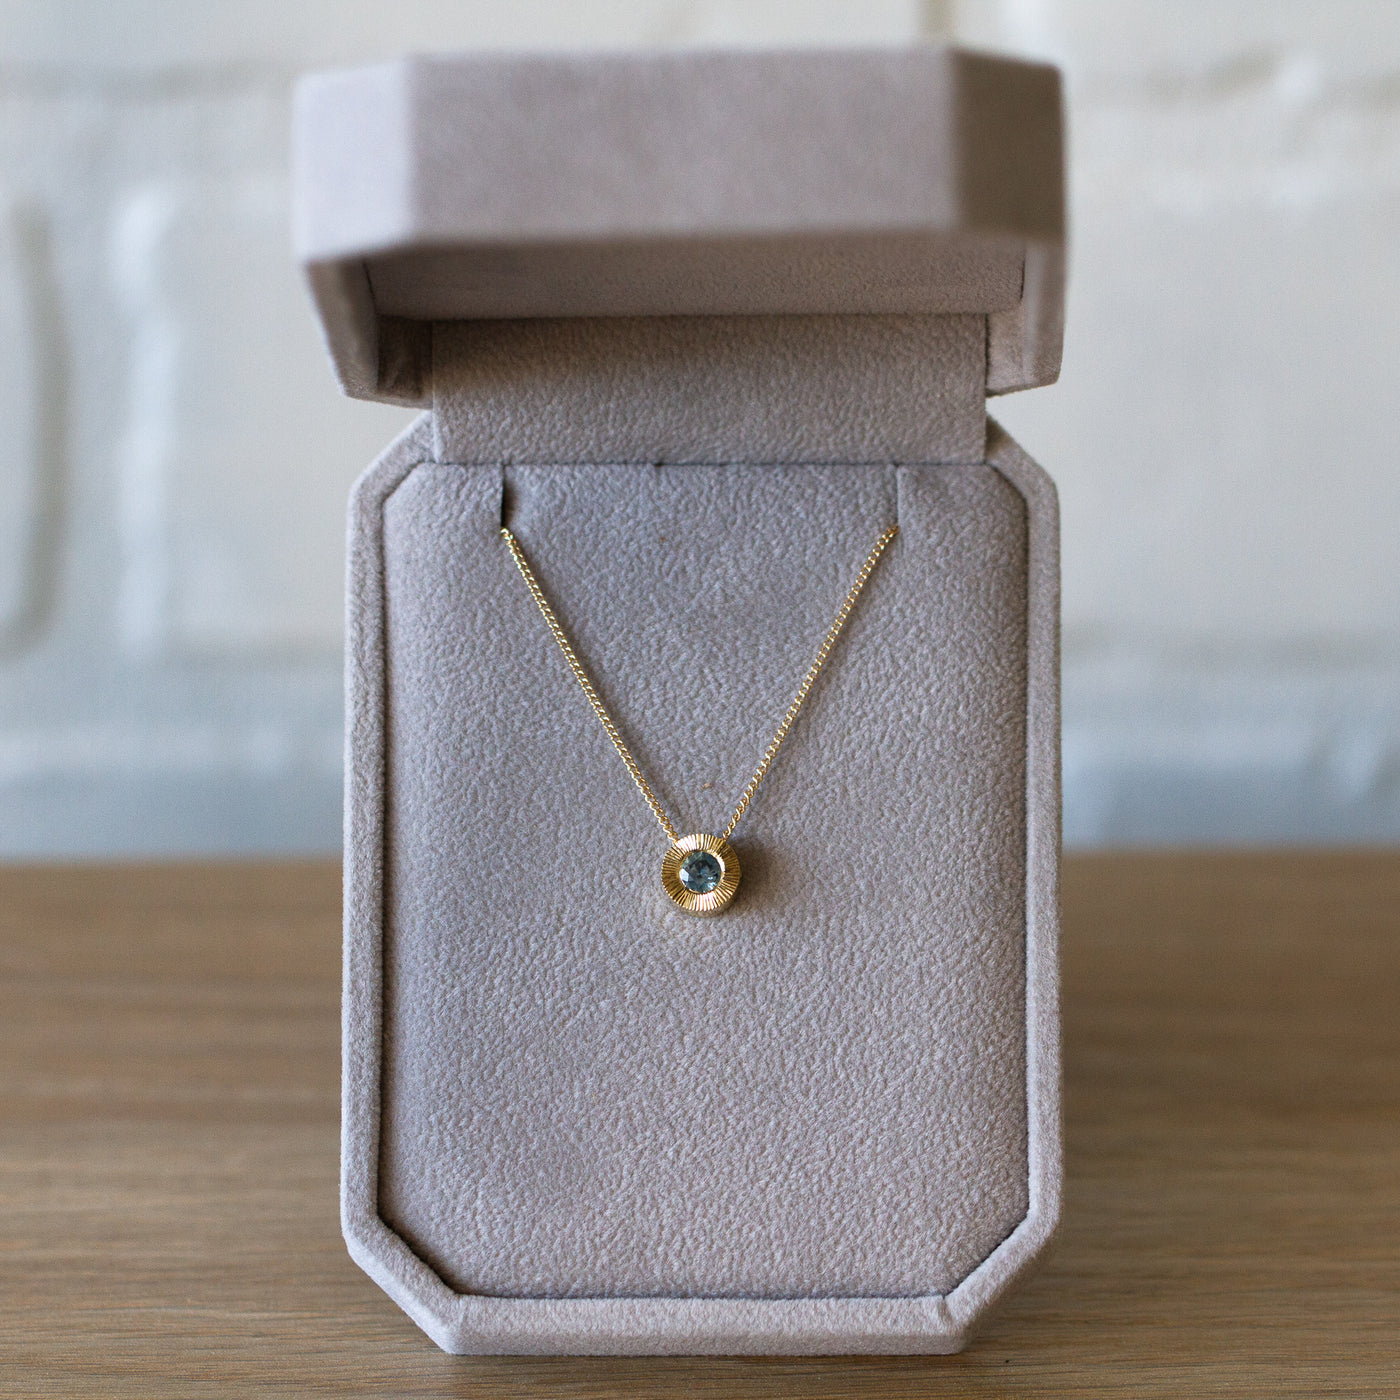 14k yellow gold Medium aurora necklace with a denim blue Montana sapphire center and engraved halo border in a gift box